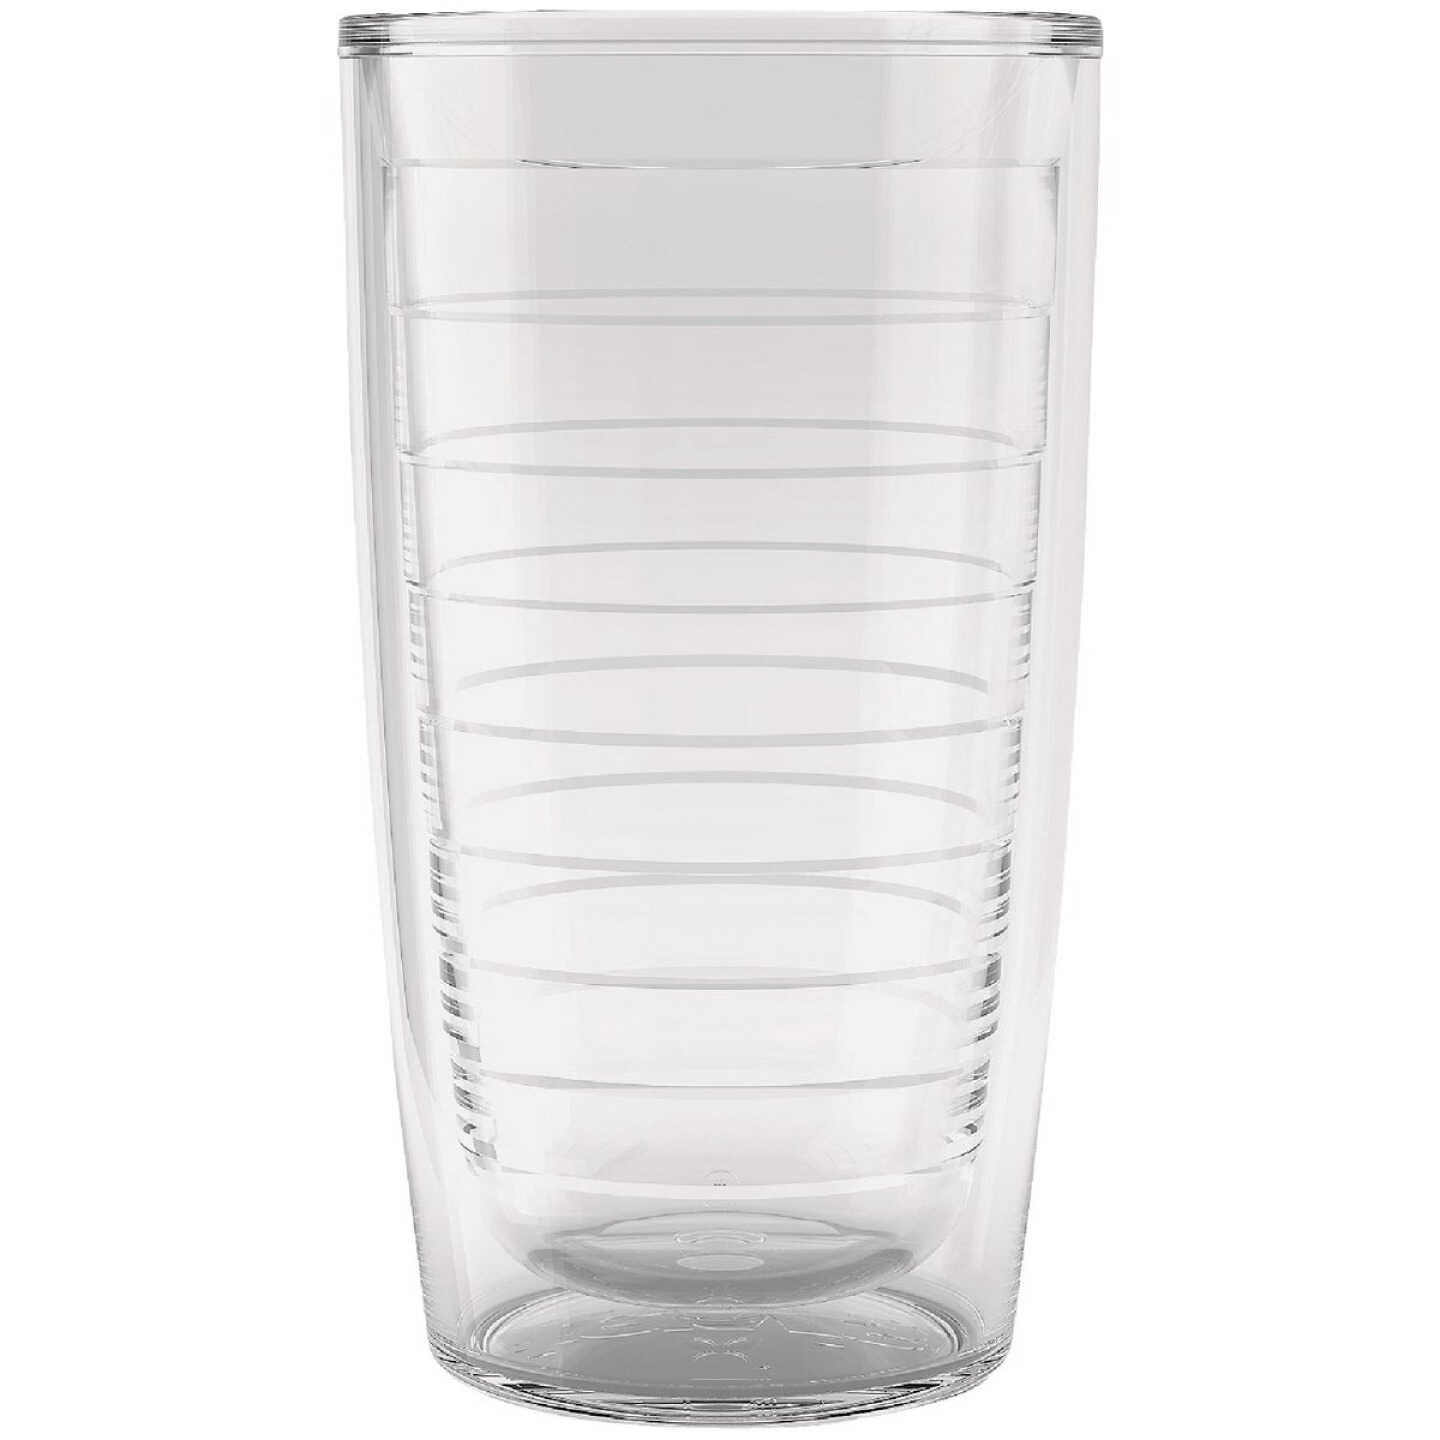 Tervis Clear & Colorful Tumbler, Clear, 16 oz